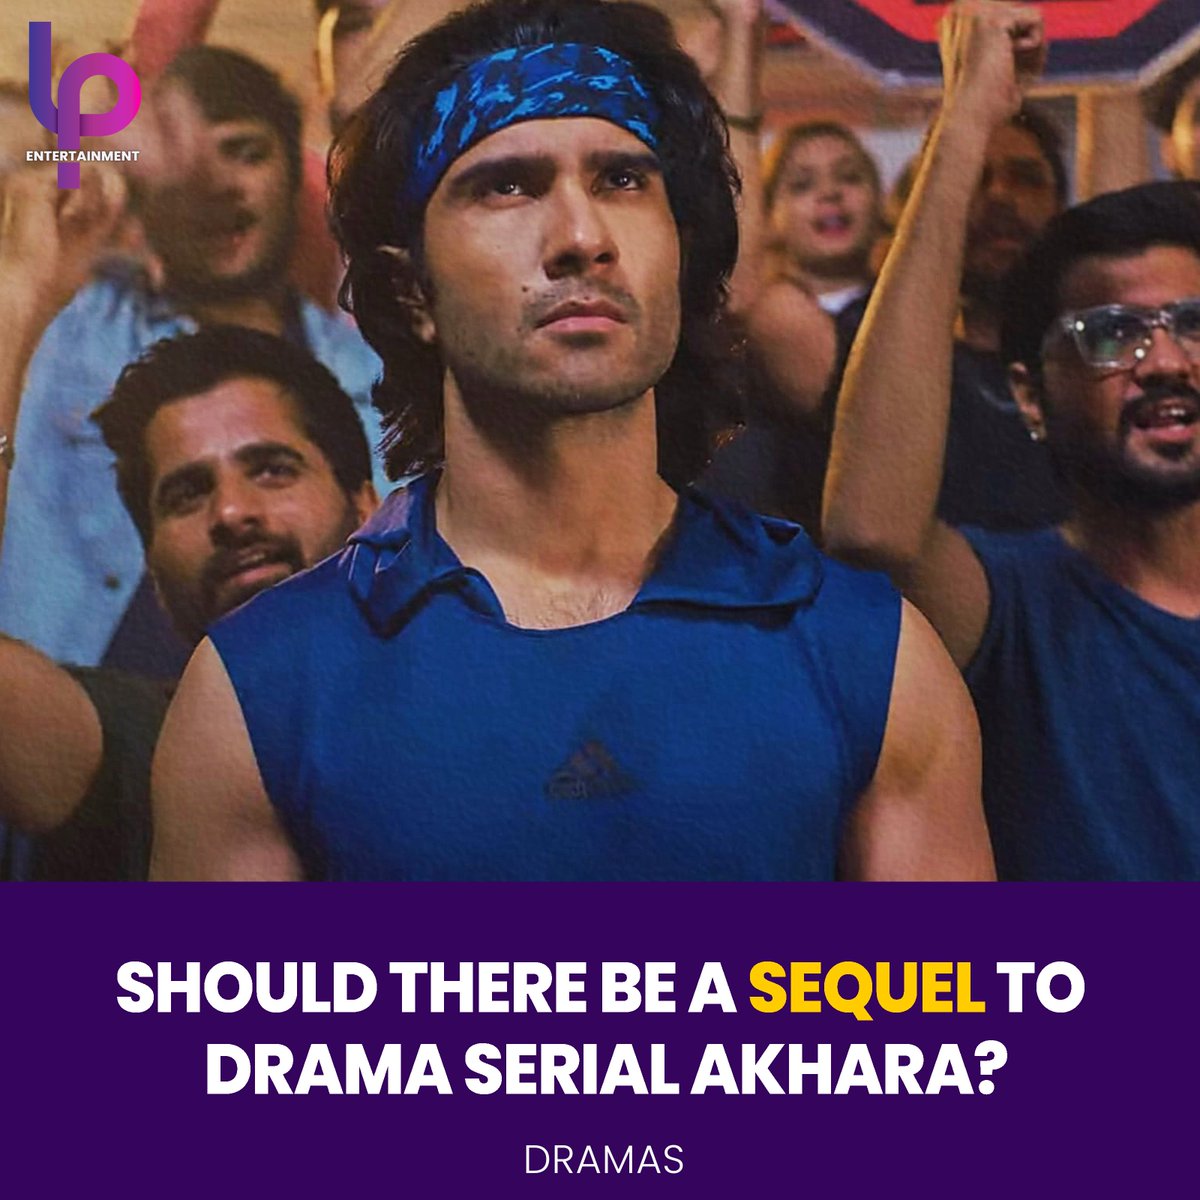 As the Sequels Trend is going on in Dramas Industry, we would love to see Akhara 2 considering it's incomplete climax and the way it got the popularity among the audience. 
Akhara 2 will be massive if made. 🔥🙌

#FerozeKhan #Akhara2 #LPEntertainment #ShamoonAbbasi #SonyaHussyn